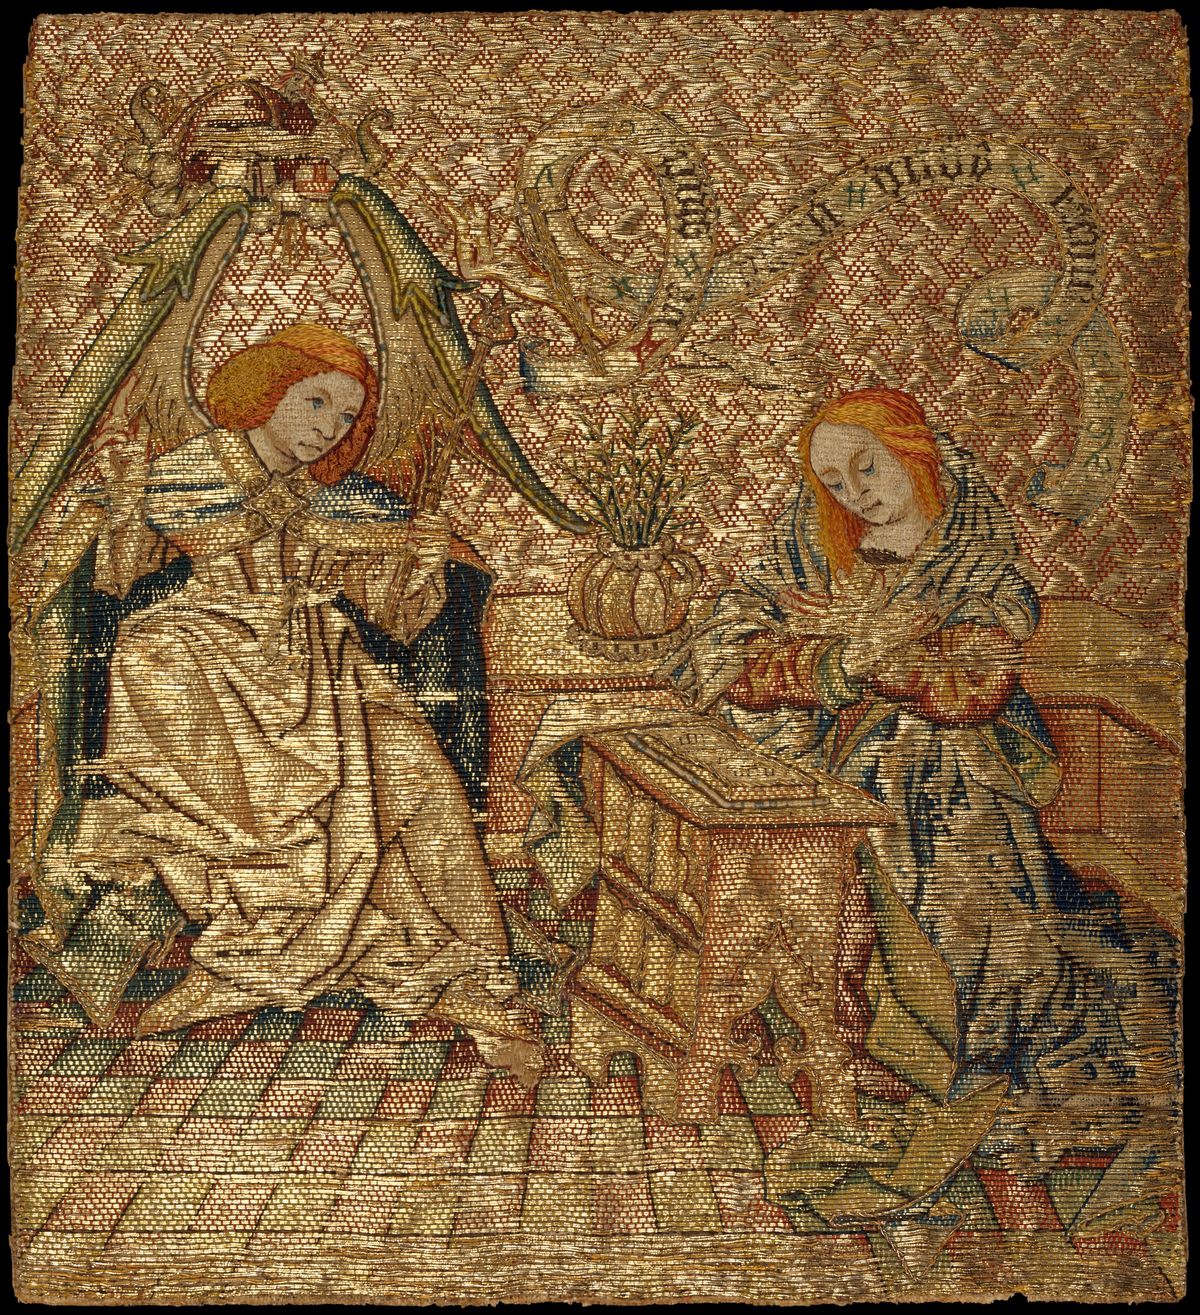 Embroidery with the Annunciation (mid-15th century, Netherlandish) - Public Domain Catholic Artwork